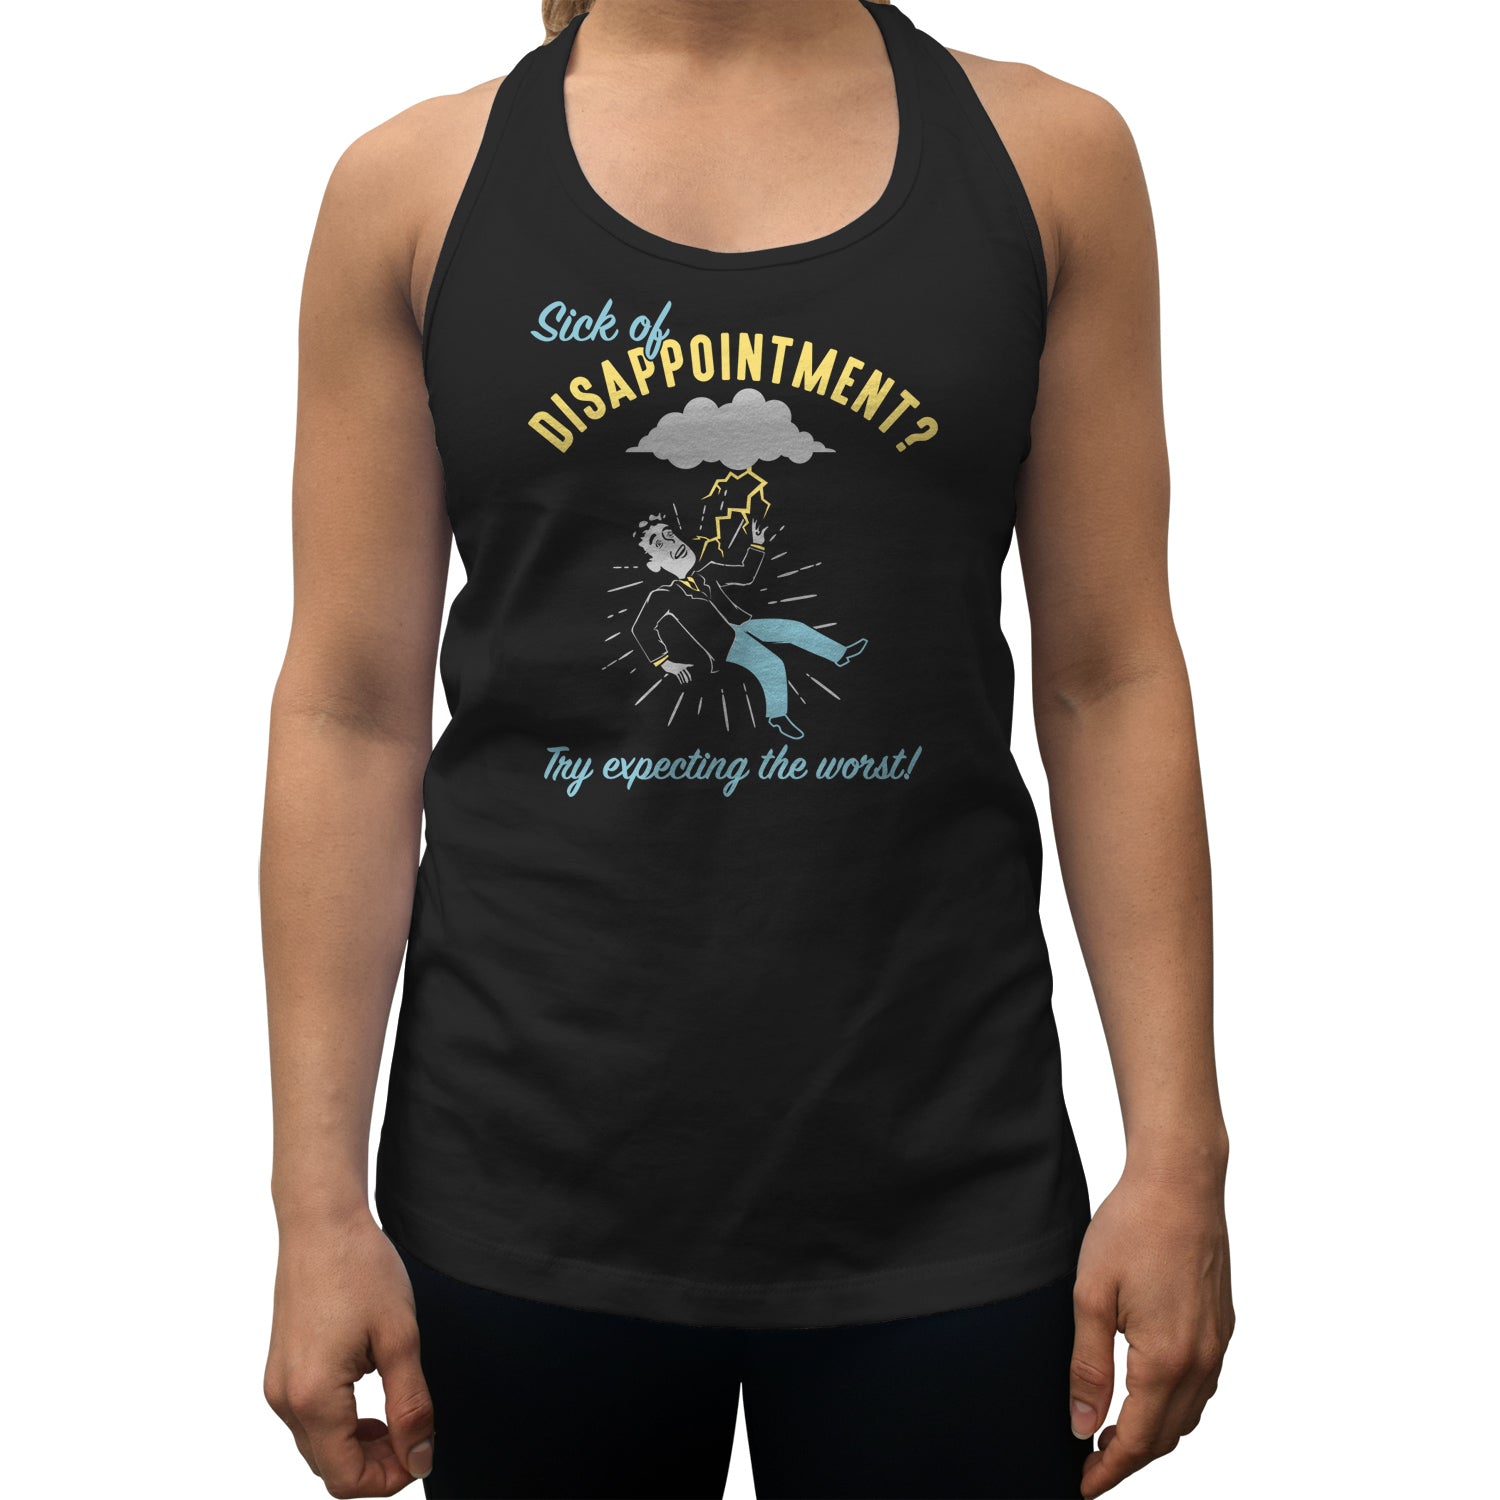 Women's Sick of Disappointment? Try Expecting The Worst! Racerback Tank Top